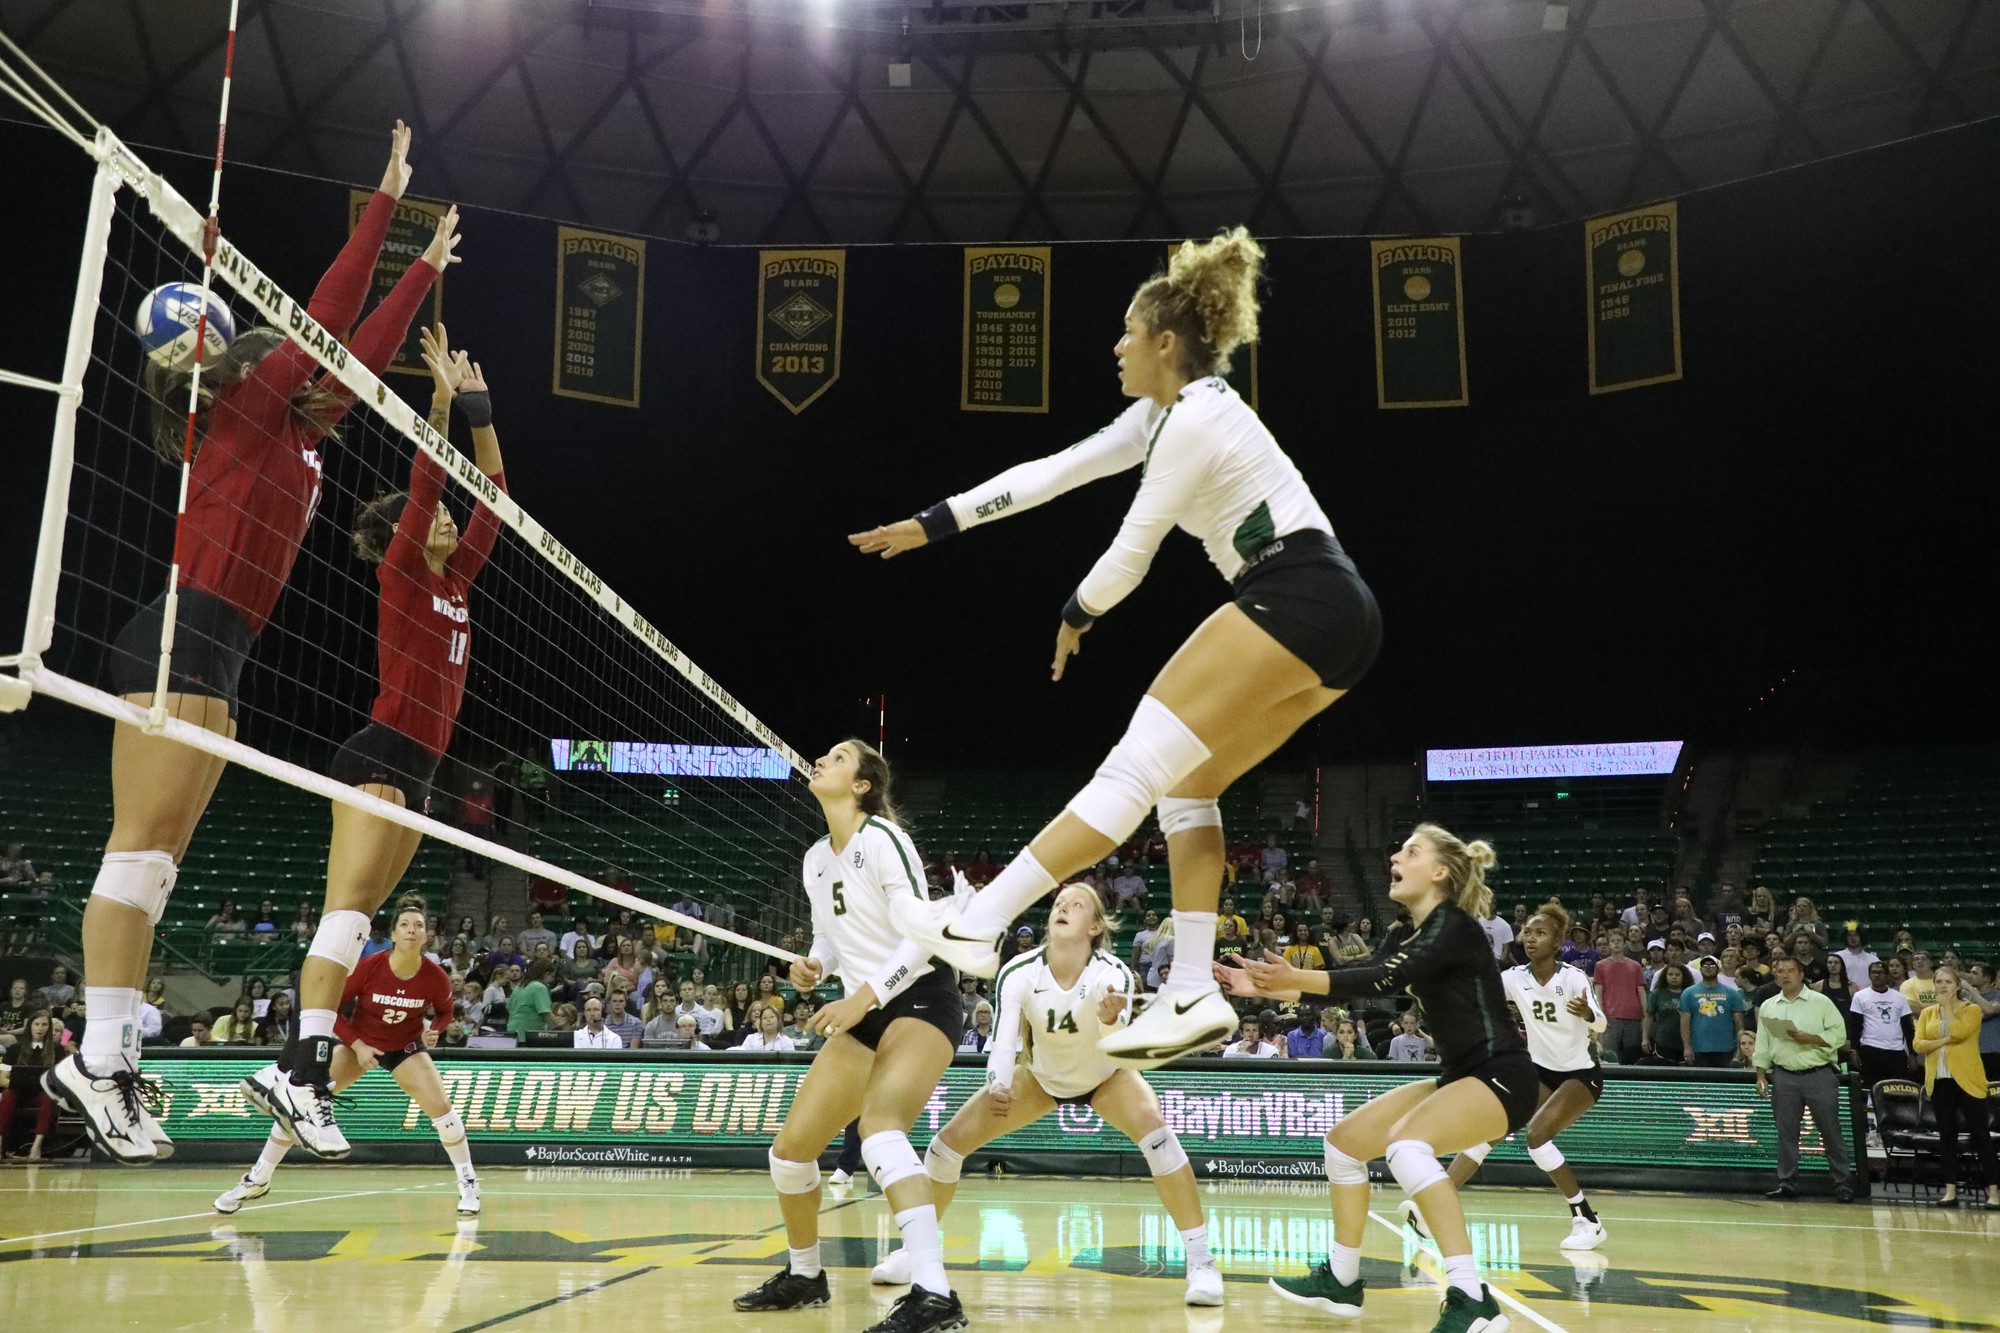 Lady Bears volleyball stomps Wisconsin Badgers 3-1 | The Baylor Lariat